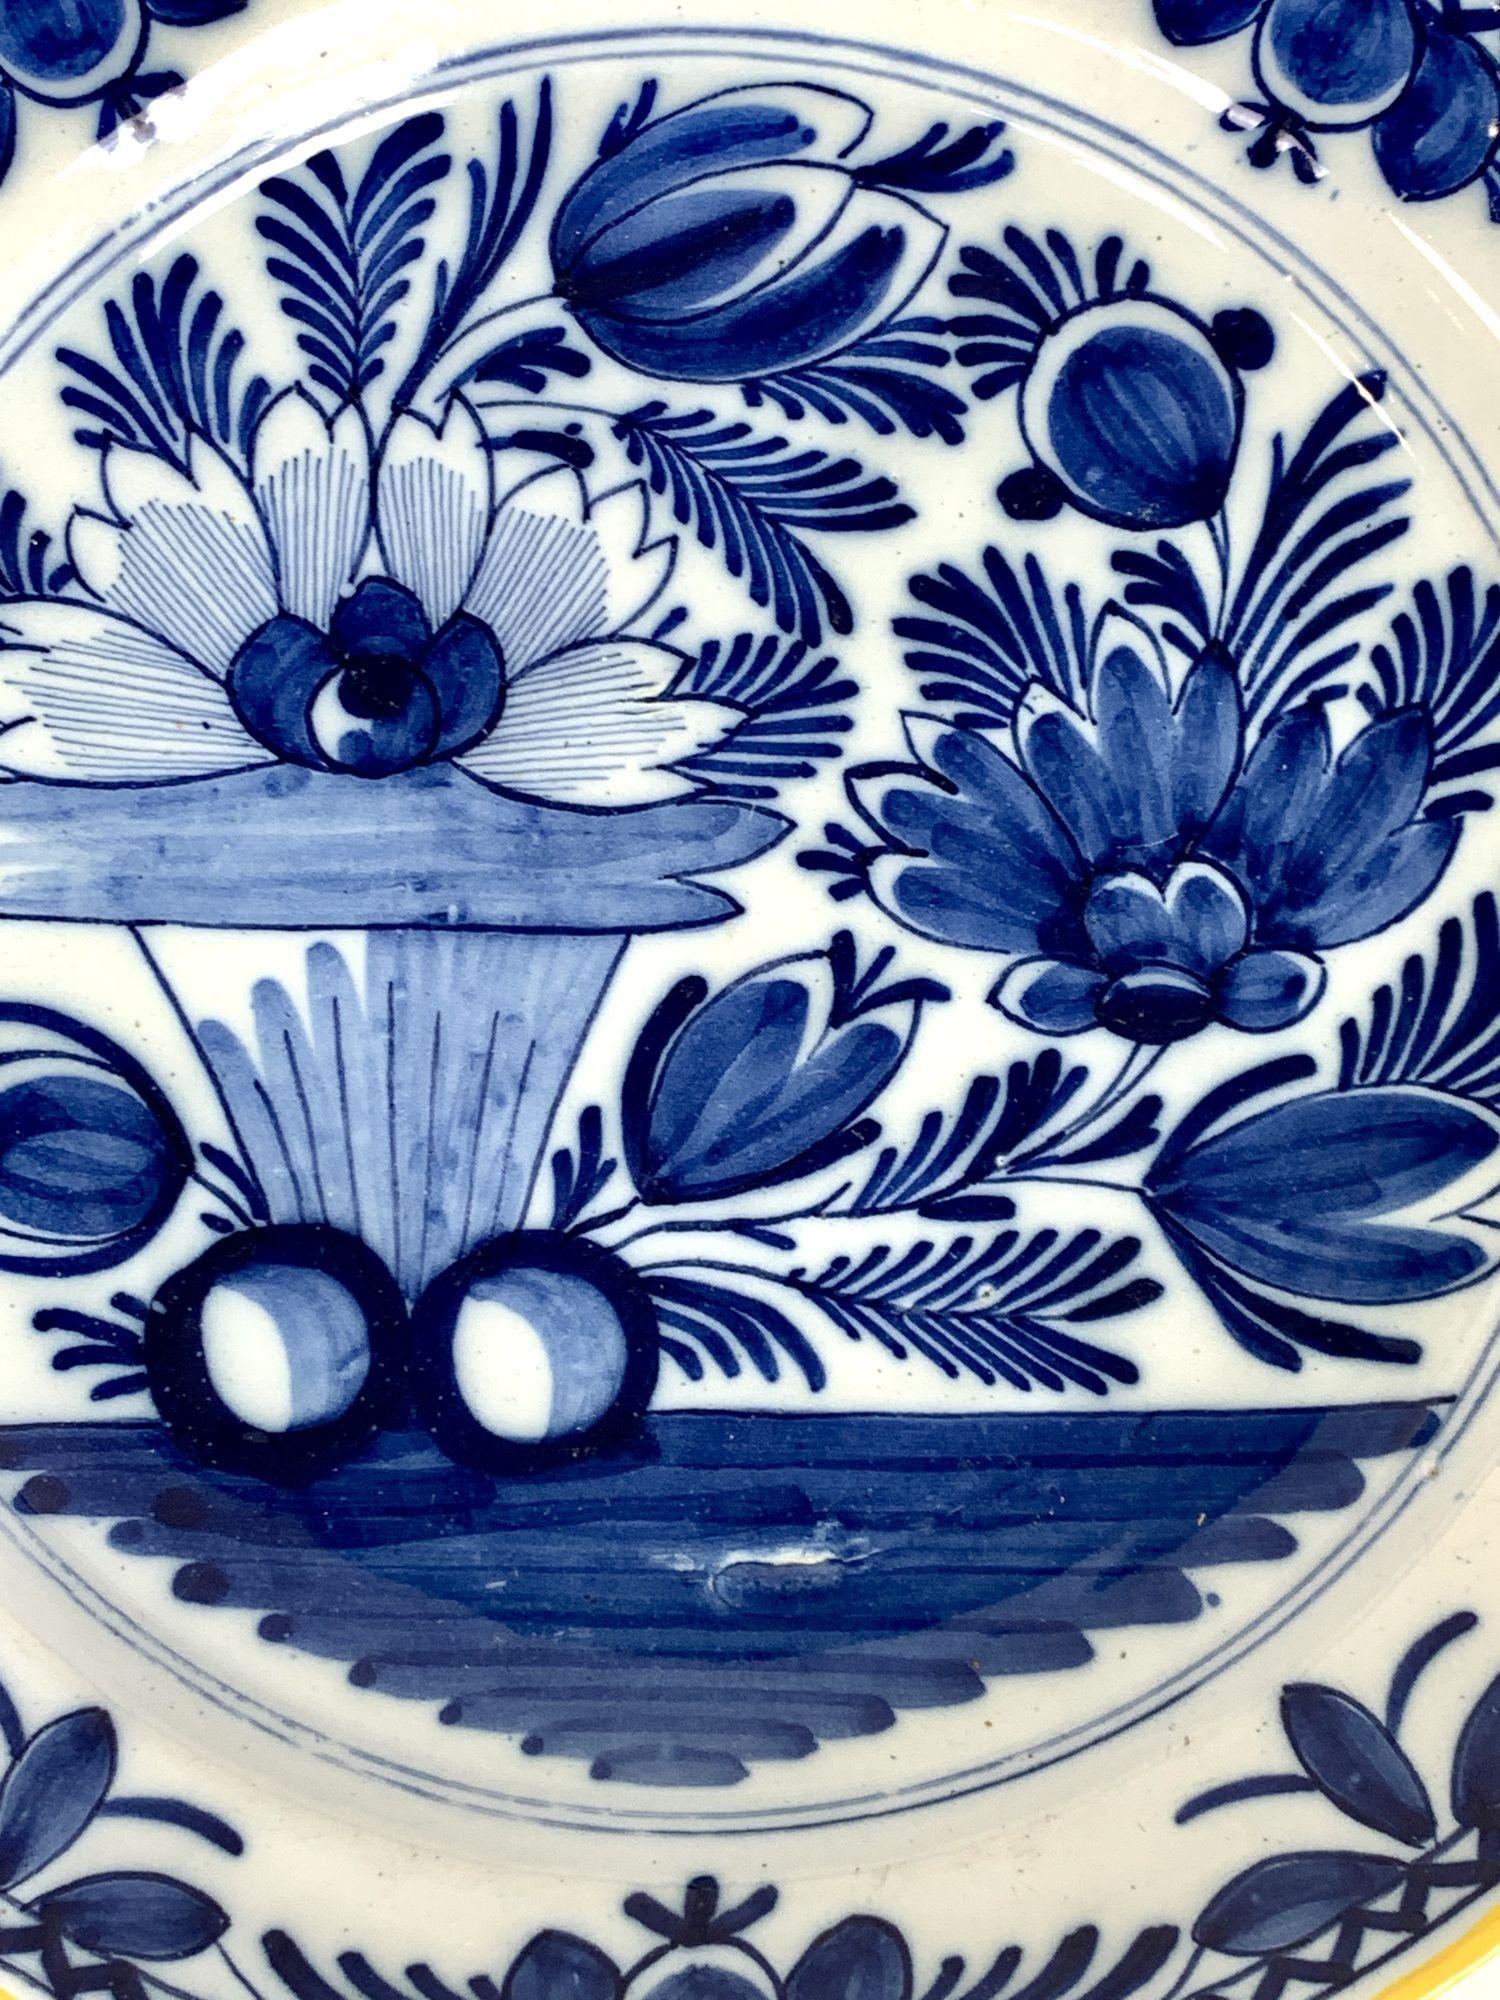 Made in the Netherlands circa 1800 this antique blue and white Dutch Delft charger has beautiful cobalt blue coloring.
The center shows a garden with tulips, peonies, and a water lily above rocks.
The bright cobalt blue is splendid on the bright